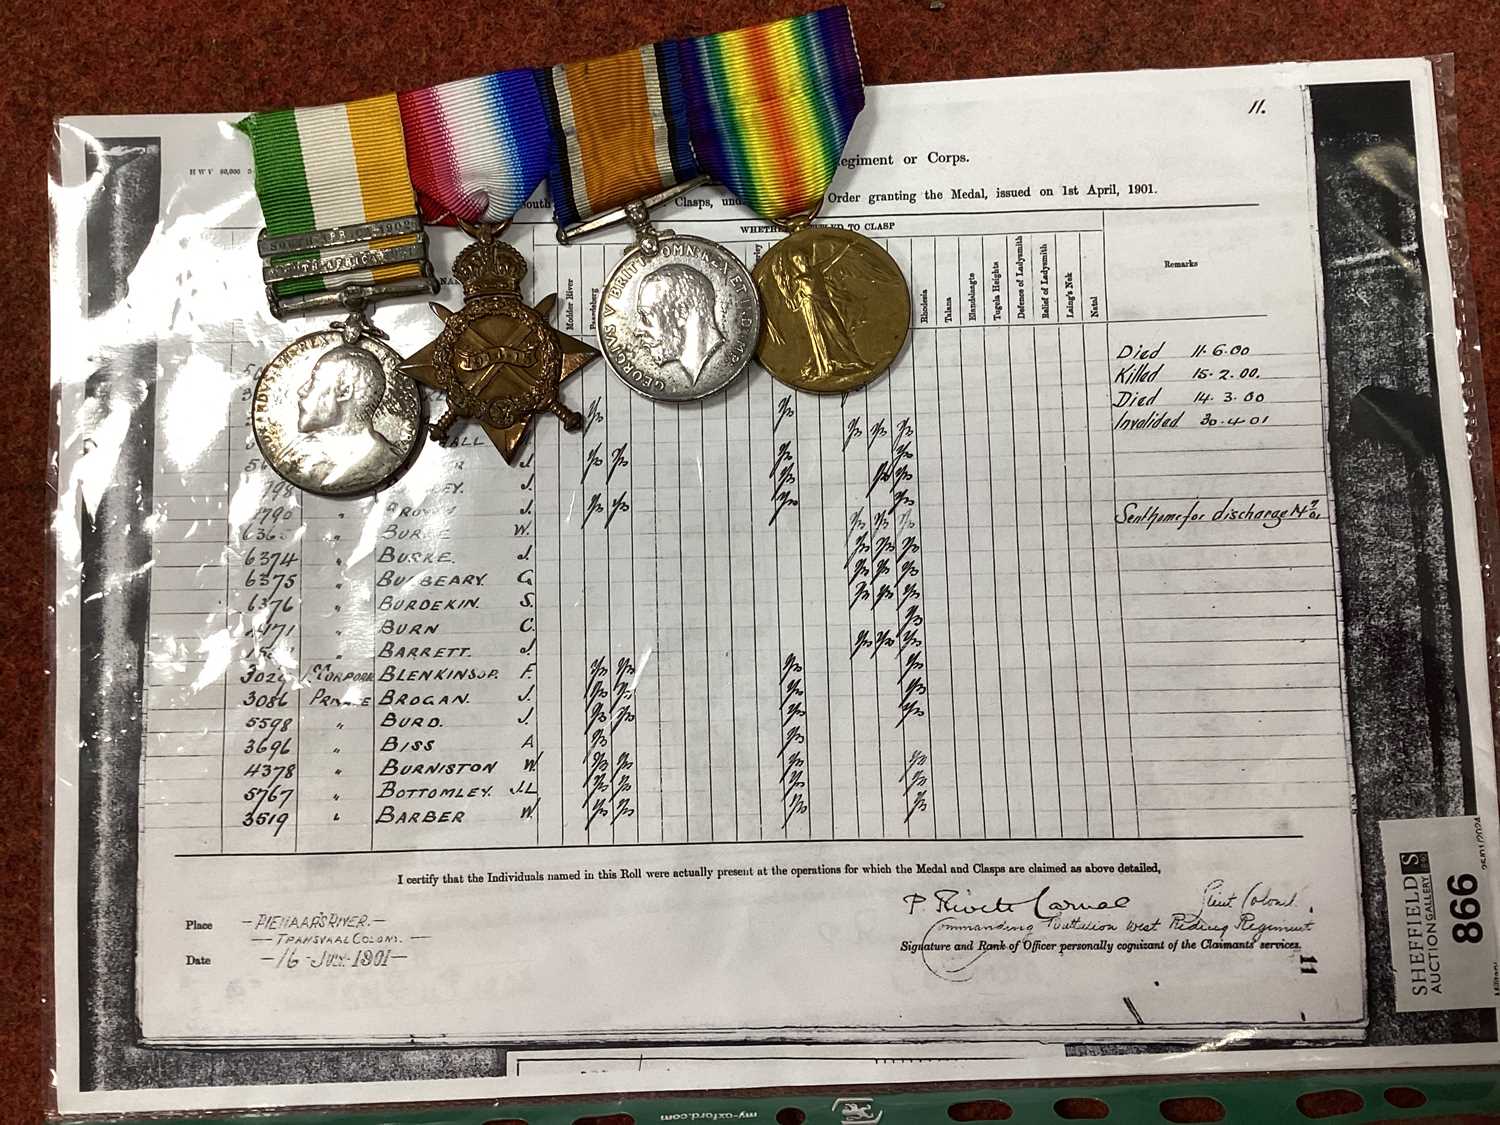 Edward VII Kings South Africa Medal, with two clasps South Africa 1901 and 1902, awarded to 6375 PTE